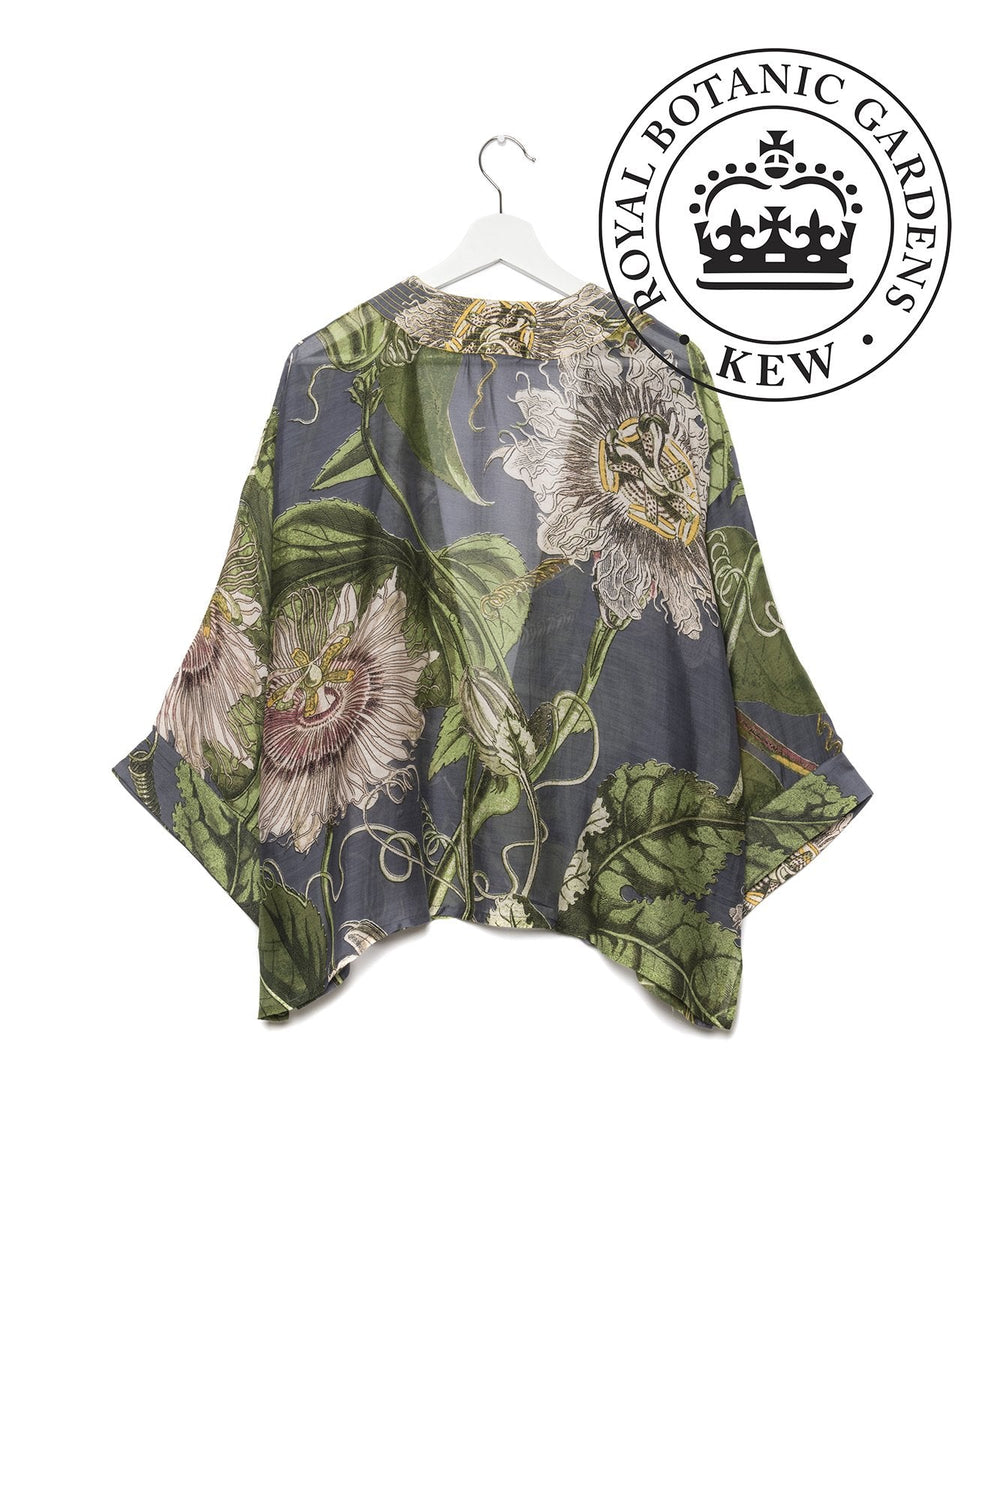 Passion Flower or 'Passiflora' mini kimono jacket grey by One Hundred Stars in Collaboration with Kew, Royal Botanic Gardens. 